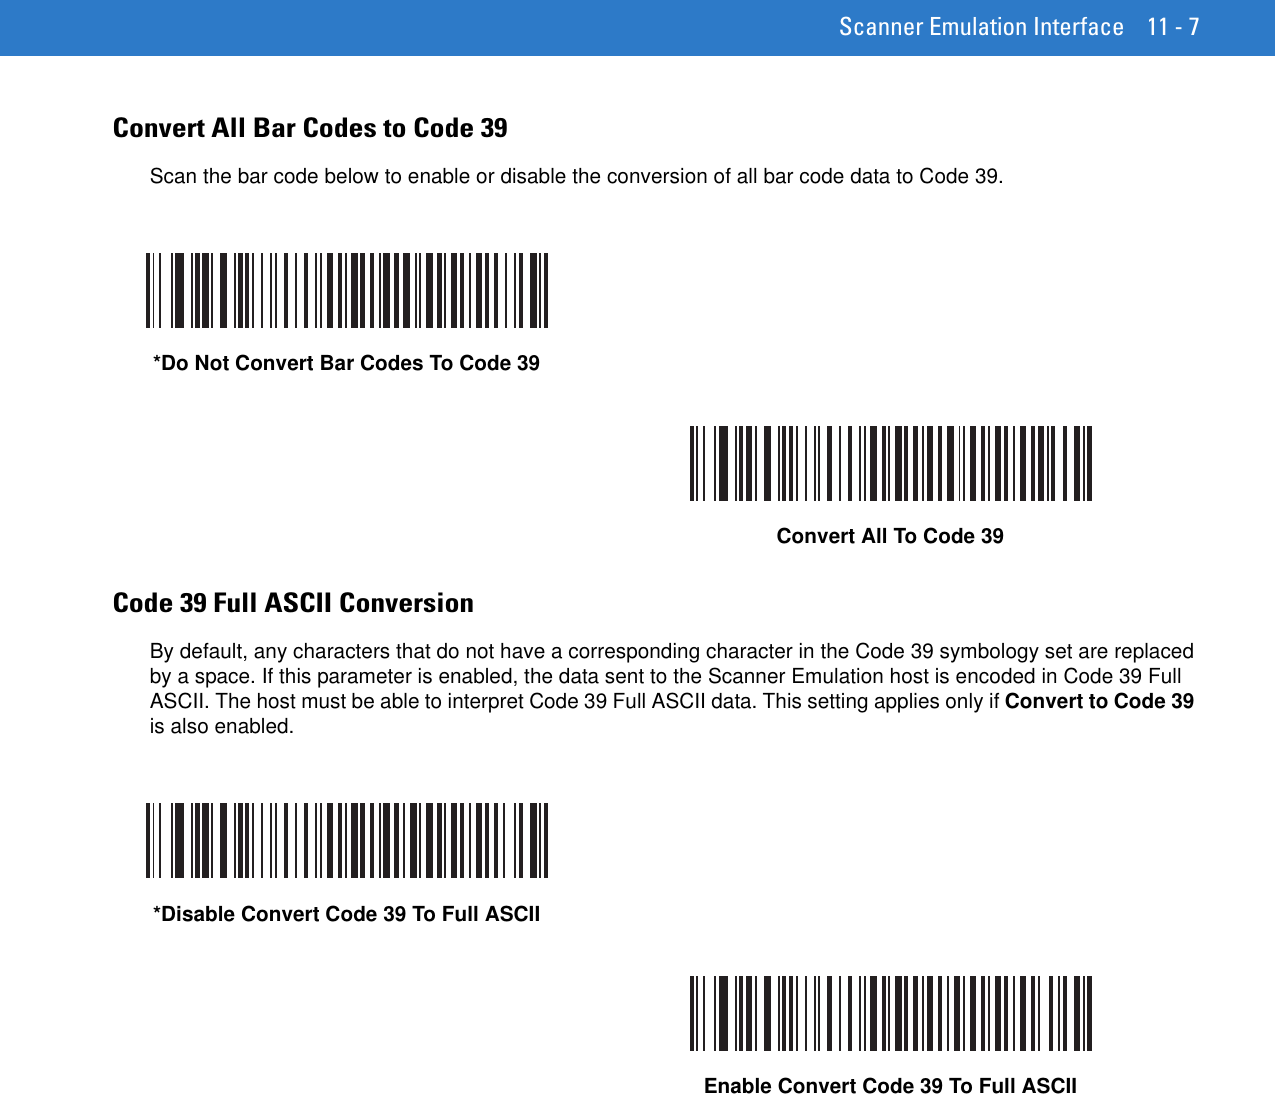 Scanner Emulation Interface 11 - 7Convert All Bar Codes to Code 39Scan the bar code below to enable or disable the conversion of all bar code data to Code 39.Code 39 Full ASCII ConversionBy default, any characters that do not have a corresponding character in the Code 39 symbology set are replaced by a space. If this parameter is enabled, the data sent to the Scanner Emulation host is encoded in Code 39 Full ASCII. The host must be able to interpret Code 39 Full ASCII data. This setting applies only if Convert to Code 39 is also enabled.*Do Not Convert Bar Codes To Code 39Convert All To Code 39*Disable Convert Code 39 To Full ASCIIEnable Convert Code 39 To Full ASCII